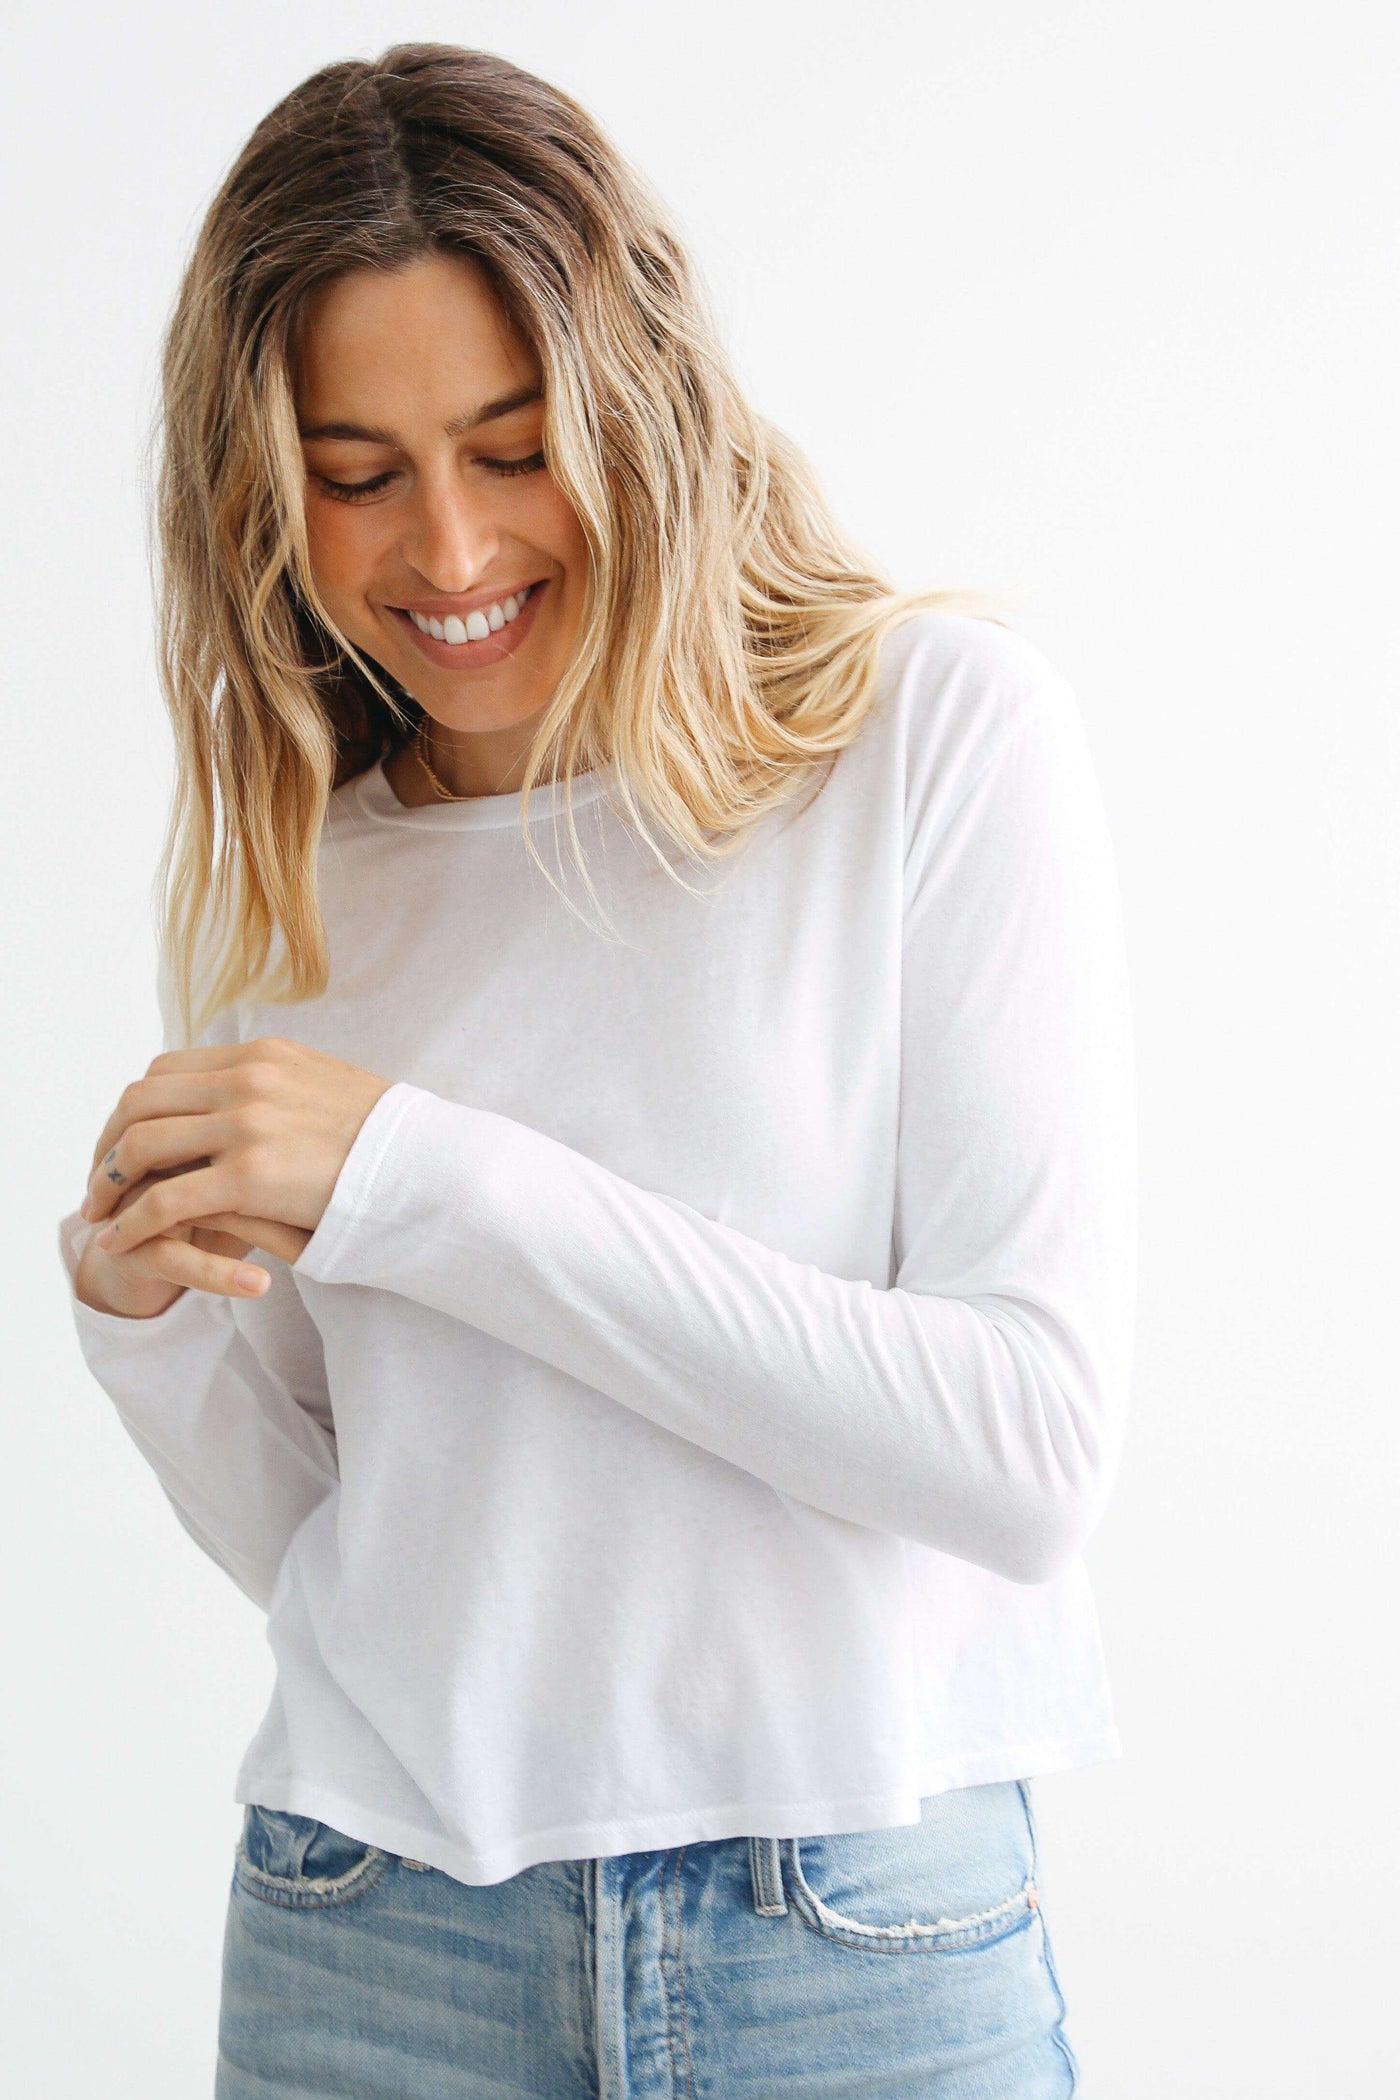 Axel is the perfect women's long sleeve crew neck boxy tee. Color: White. Just boxy enough and 100% crisp cotton. A variety of sizes & colors available. Buy now!